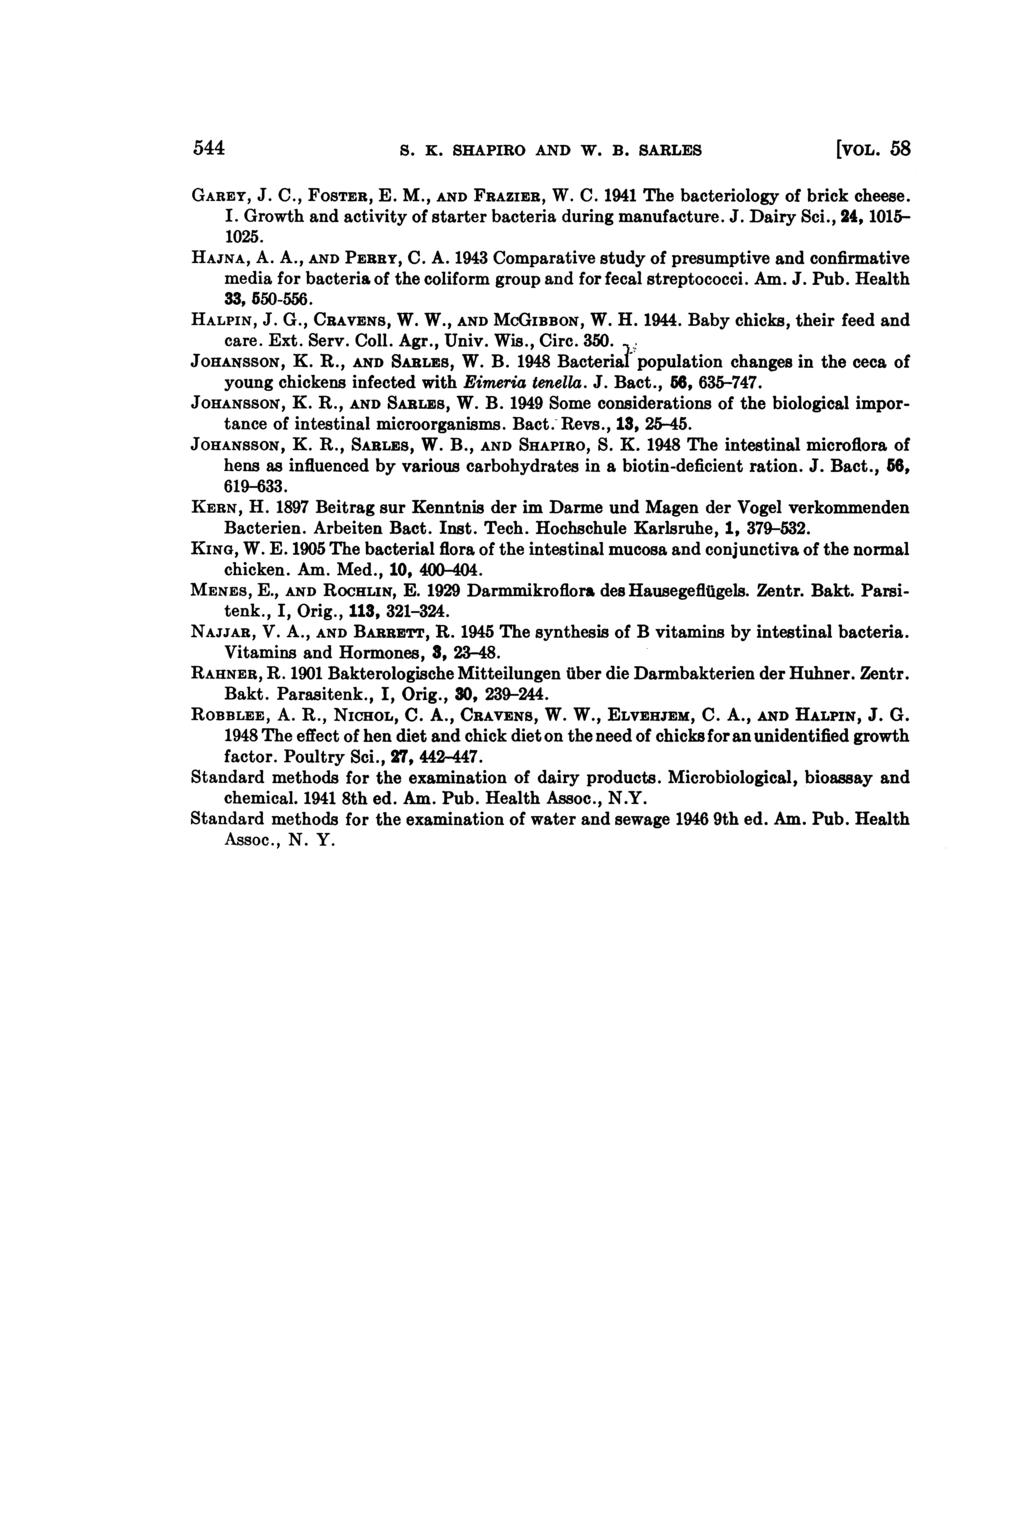 544 S. K. SHAPIRO AND W. B. SARLES [VOL. 58 GAREY, J. C., FOSTER, E. M., AND FRAZIER, W. C. 1941 The bacteriology of brick cheese. I. Growth and activity of starter bacteria during manufacture. J. Dairy Sci.